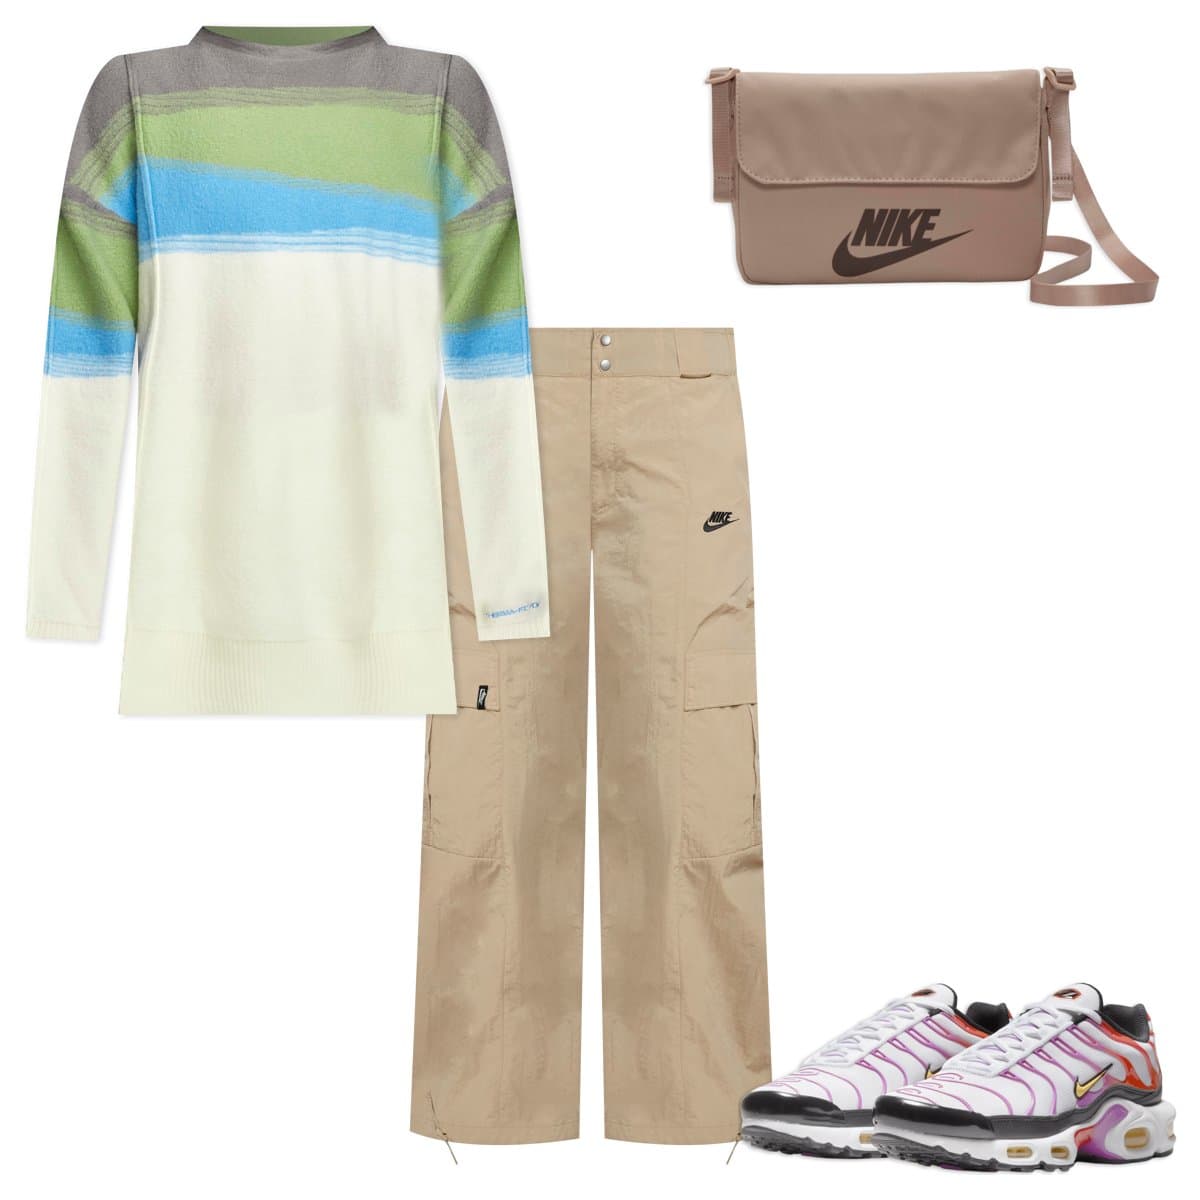 What to Wear to a Baseball Game: 5 Outfit Ideas You're Sure to Love. Nike PH